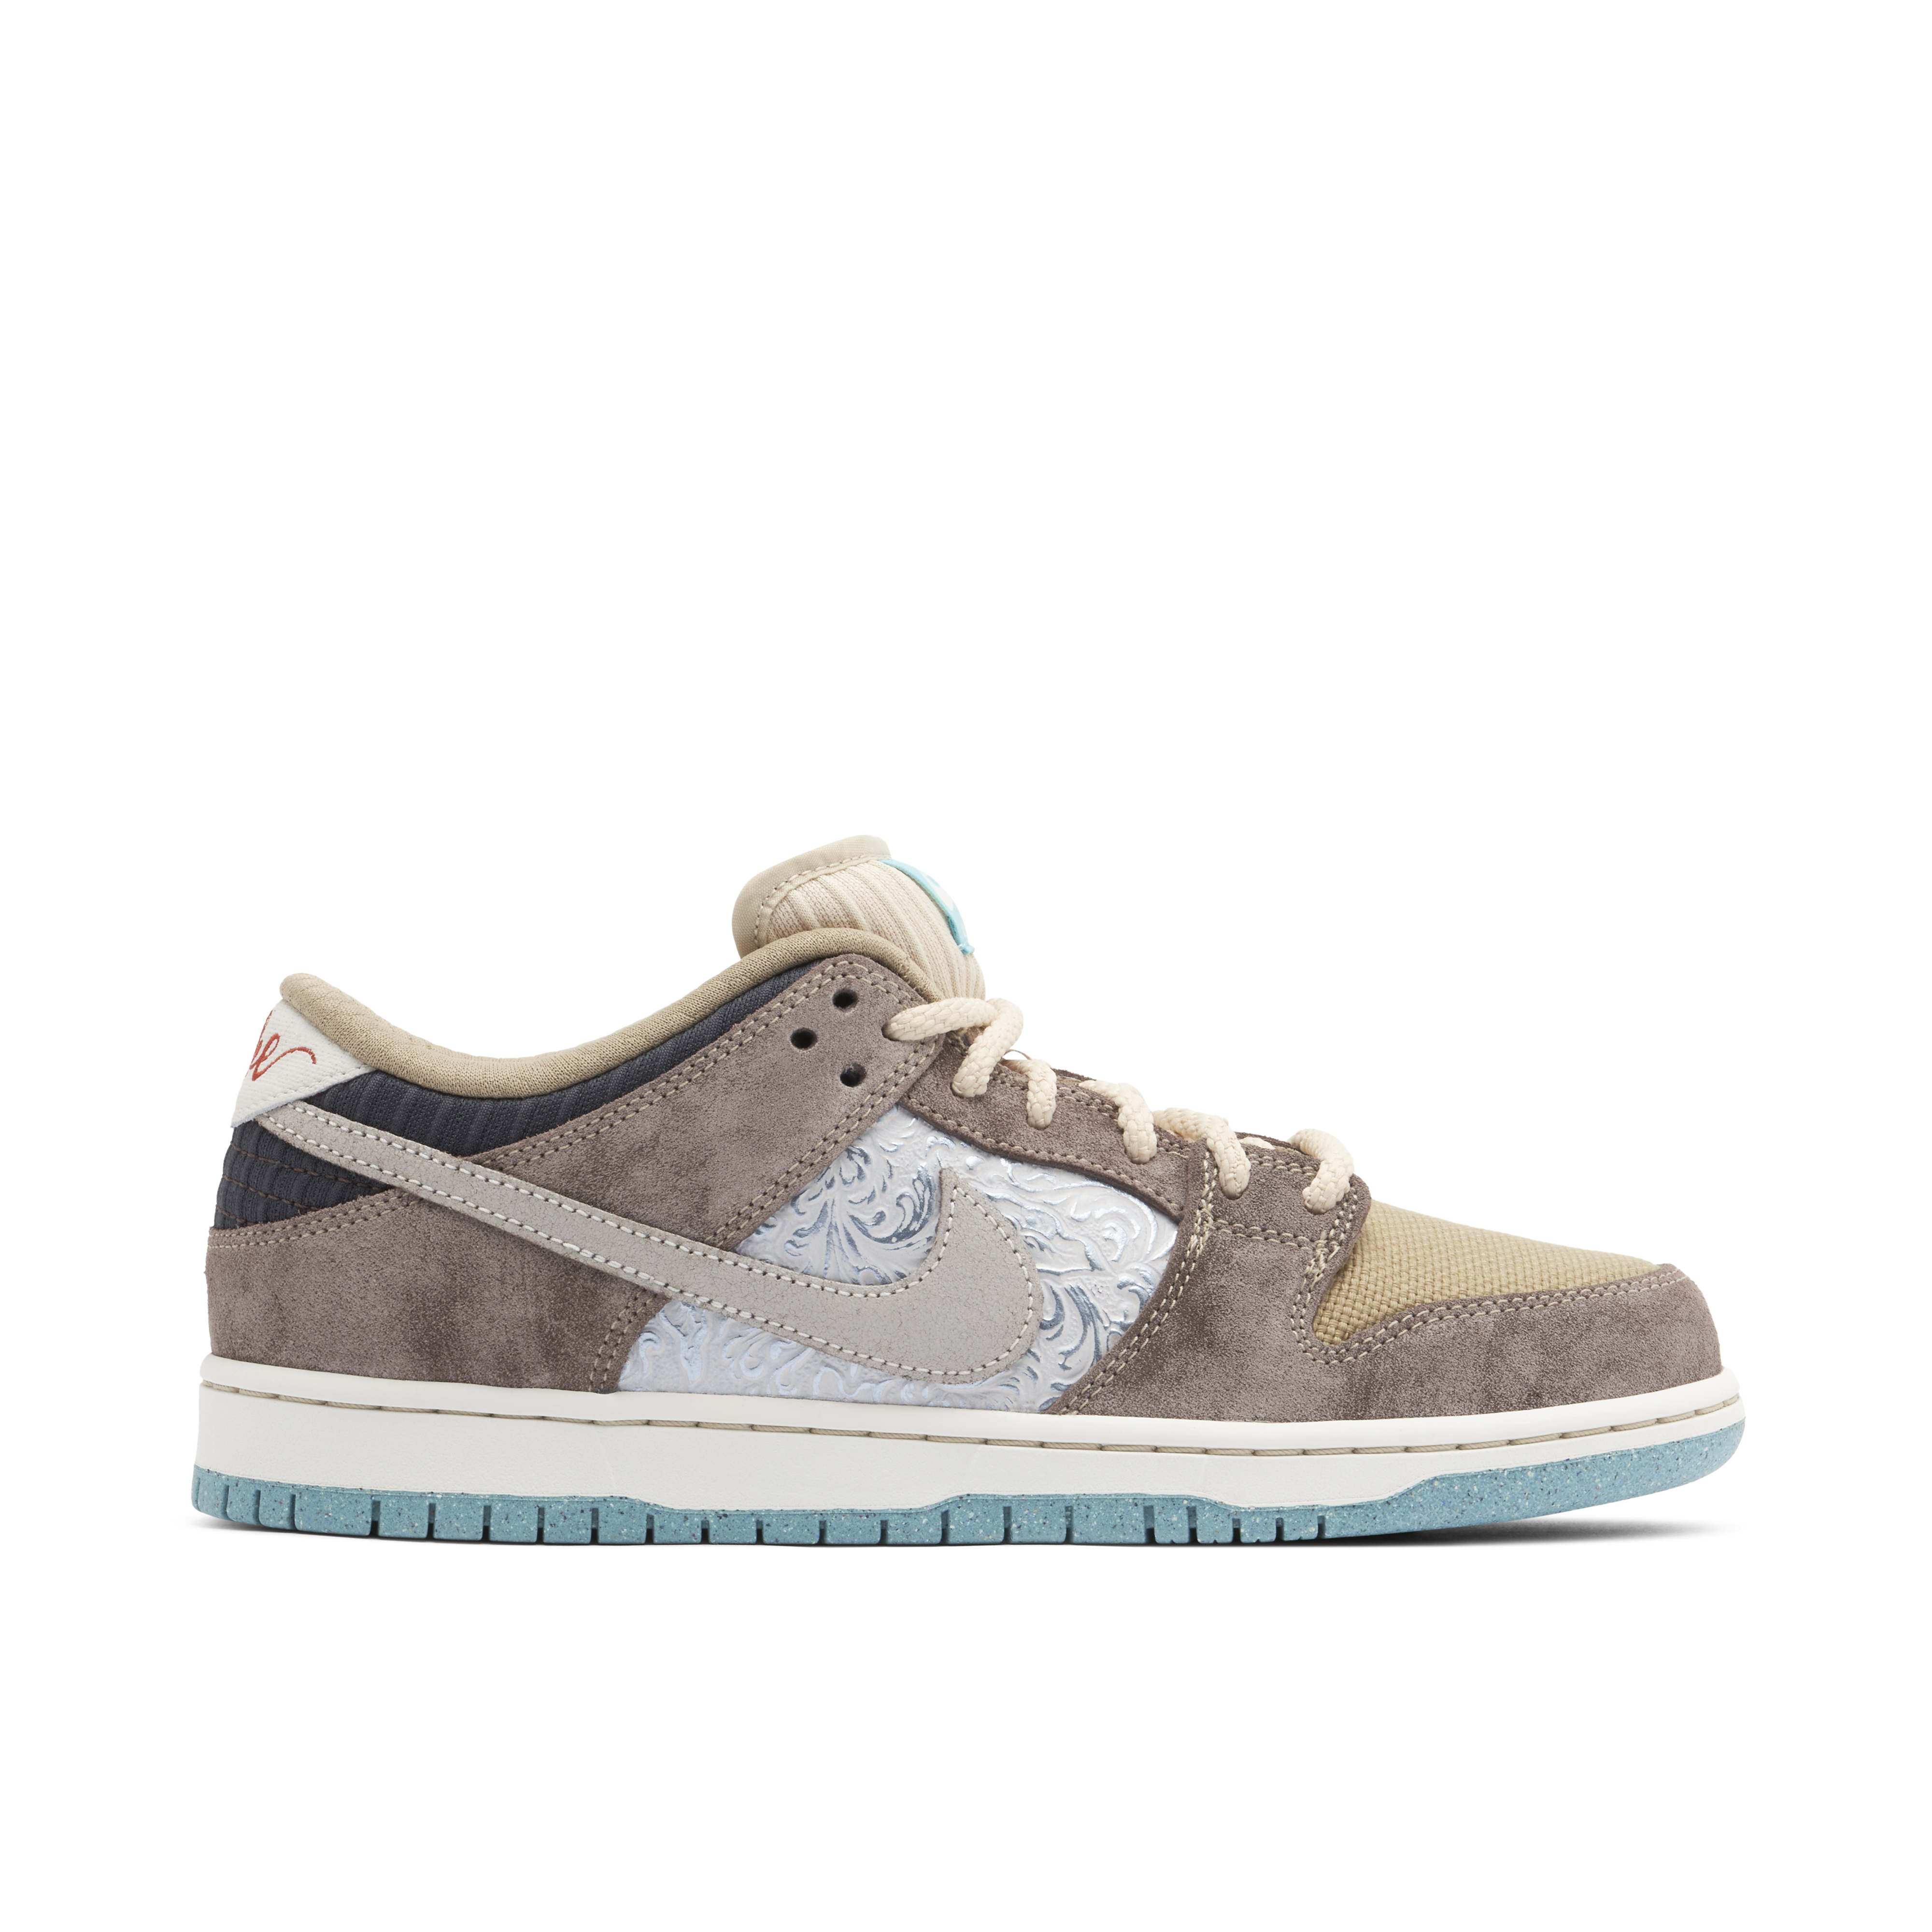 Nike SB Dunk Low Paisley | DH7534-200 | Laced